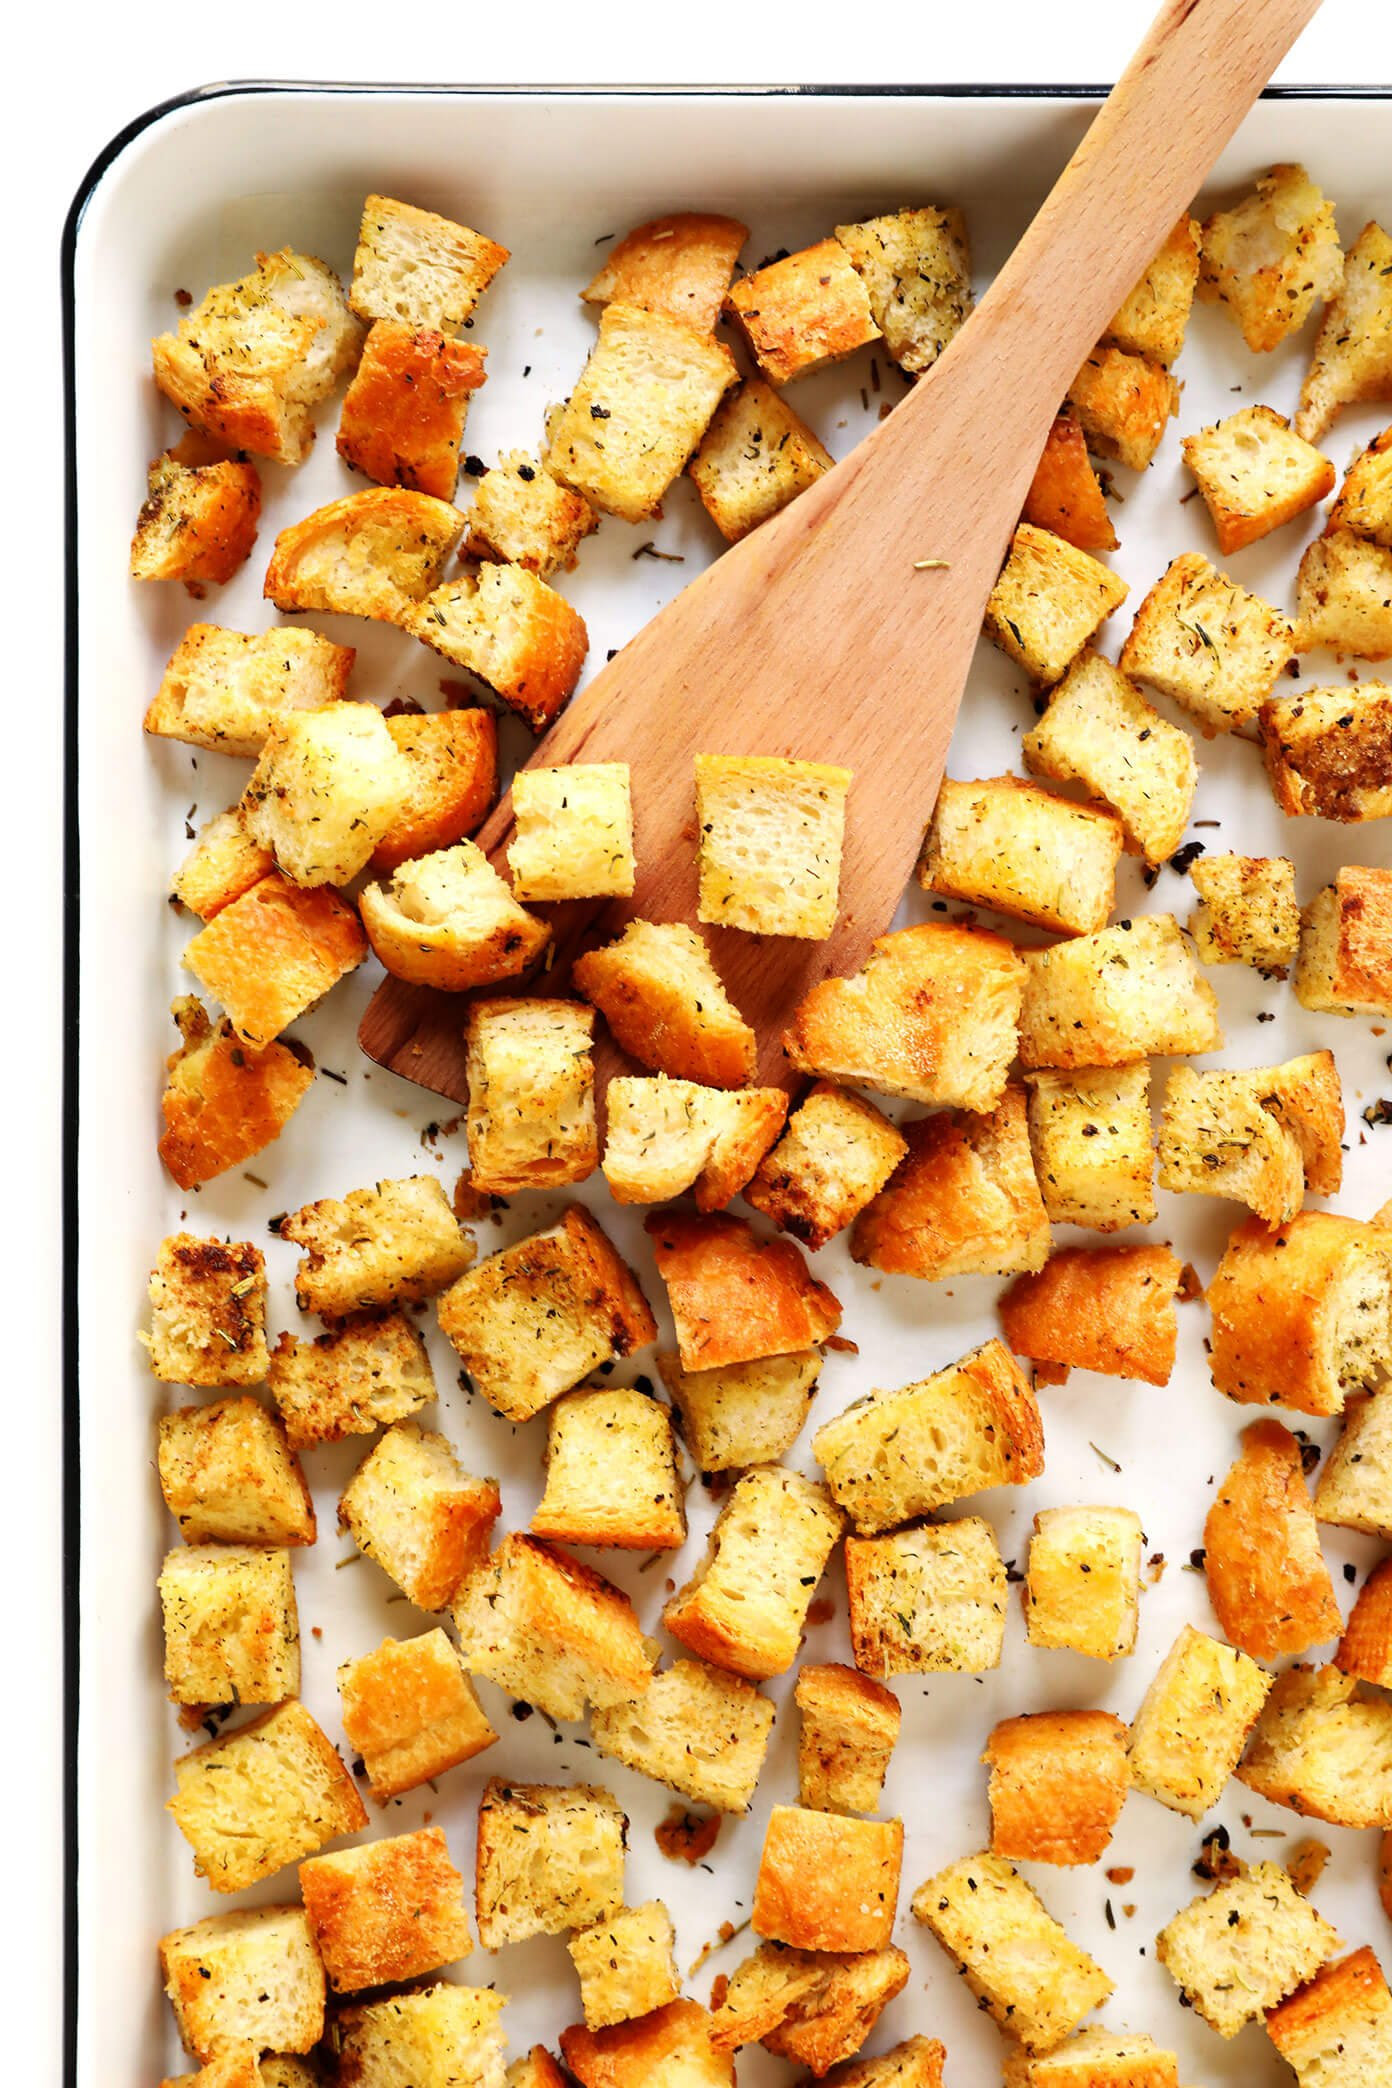 Read more on her website or. How To Make Homemade Croutons Gimme Some Oven